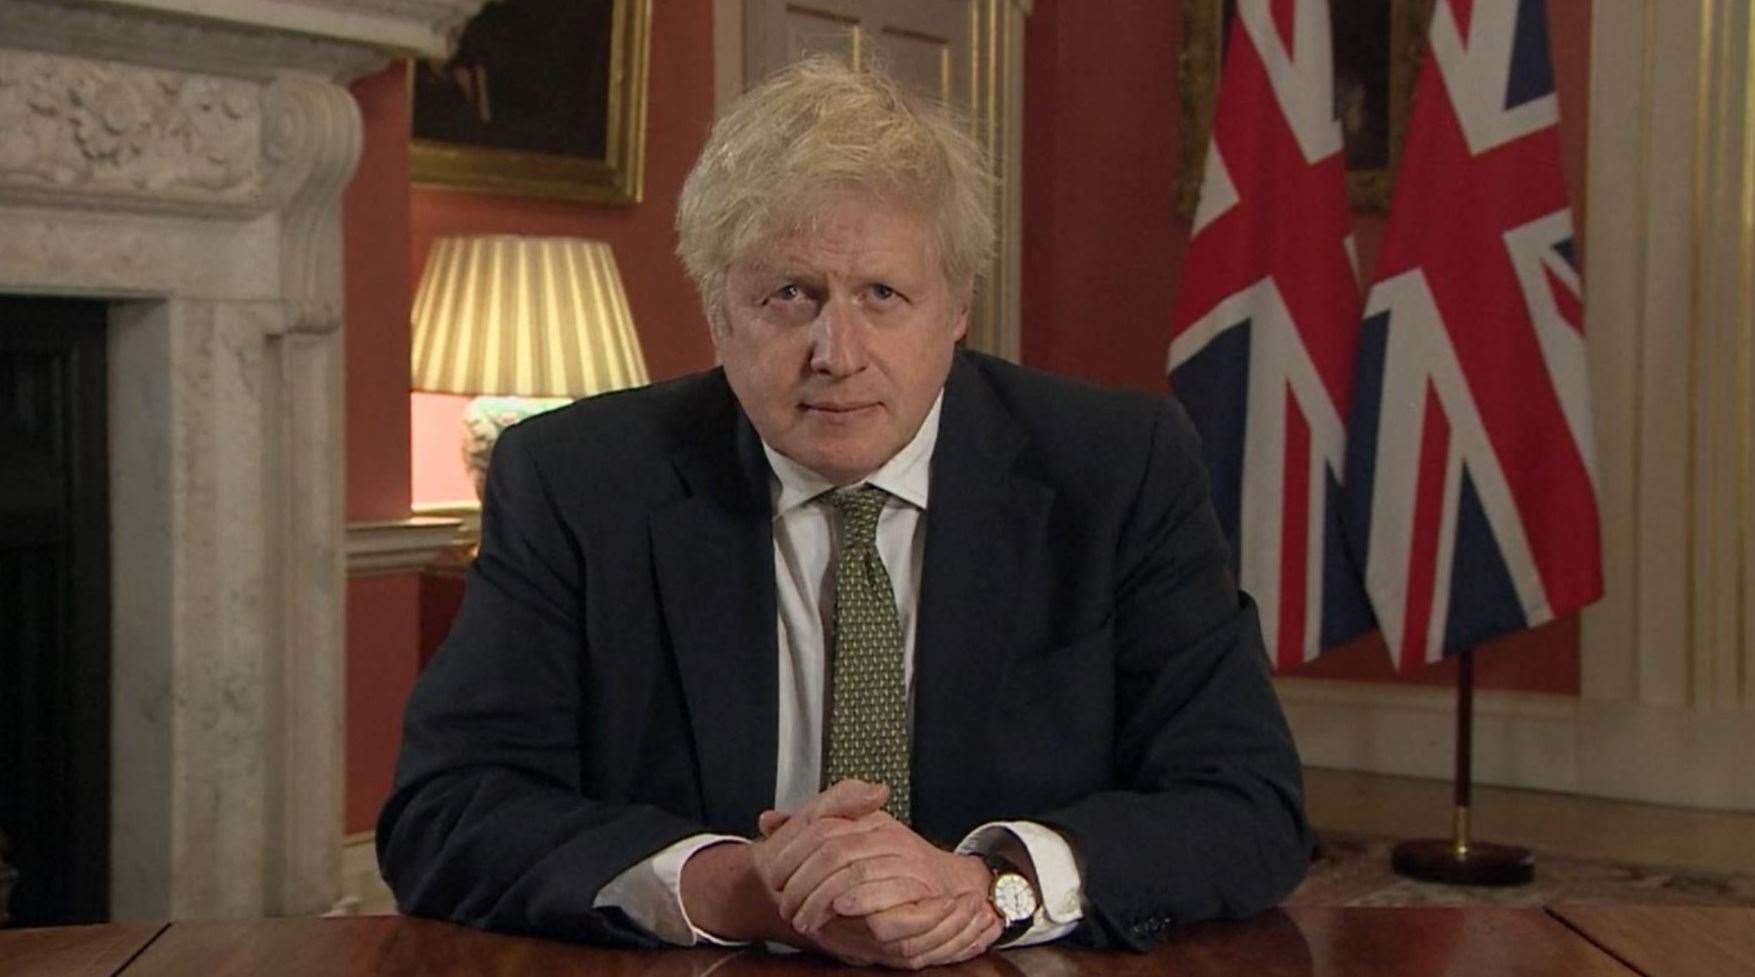 Prime Minister Boris Johnson making a televised address setting out new emergency measures to control the spread of coronavirus in England